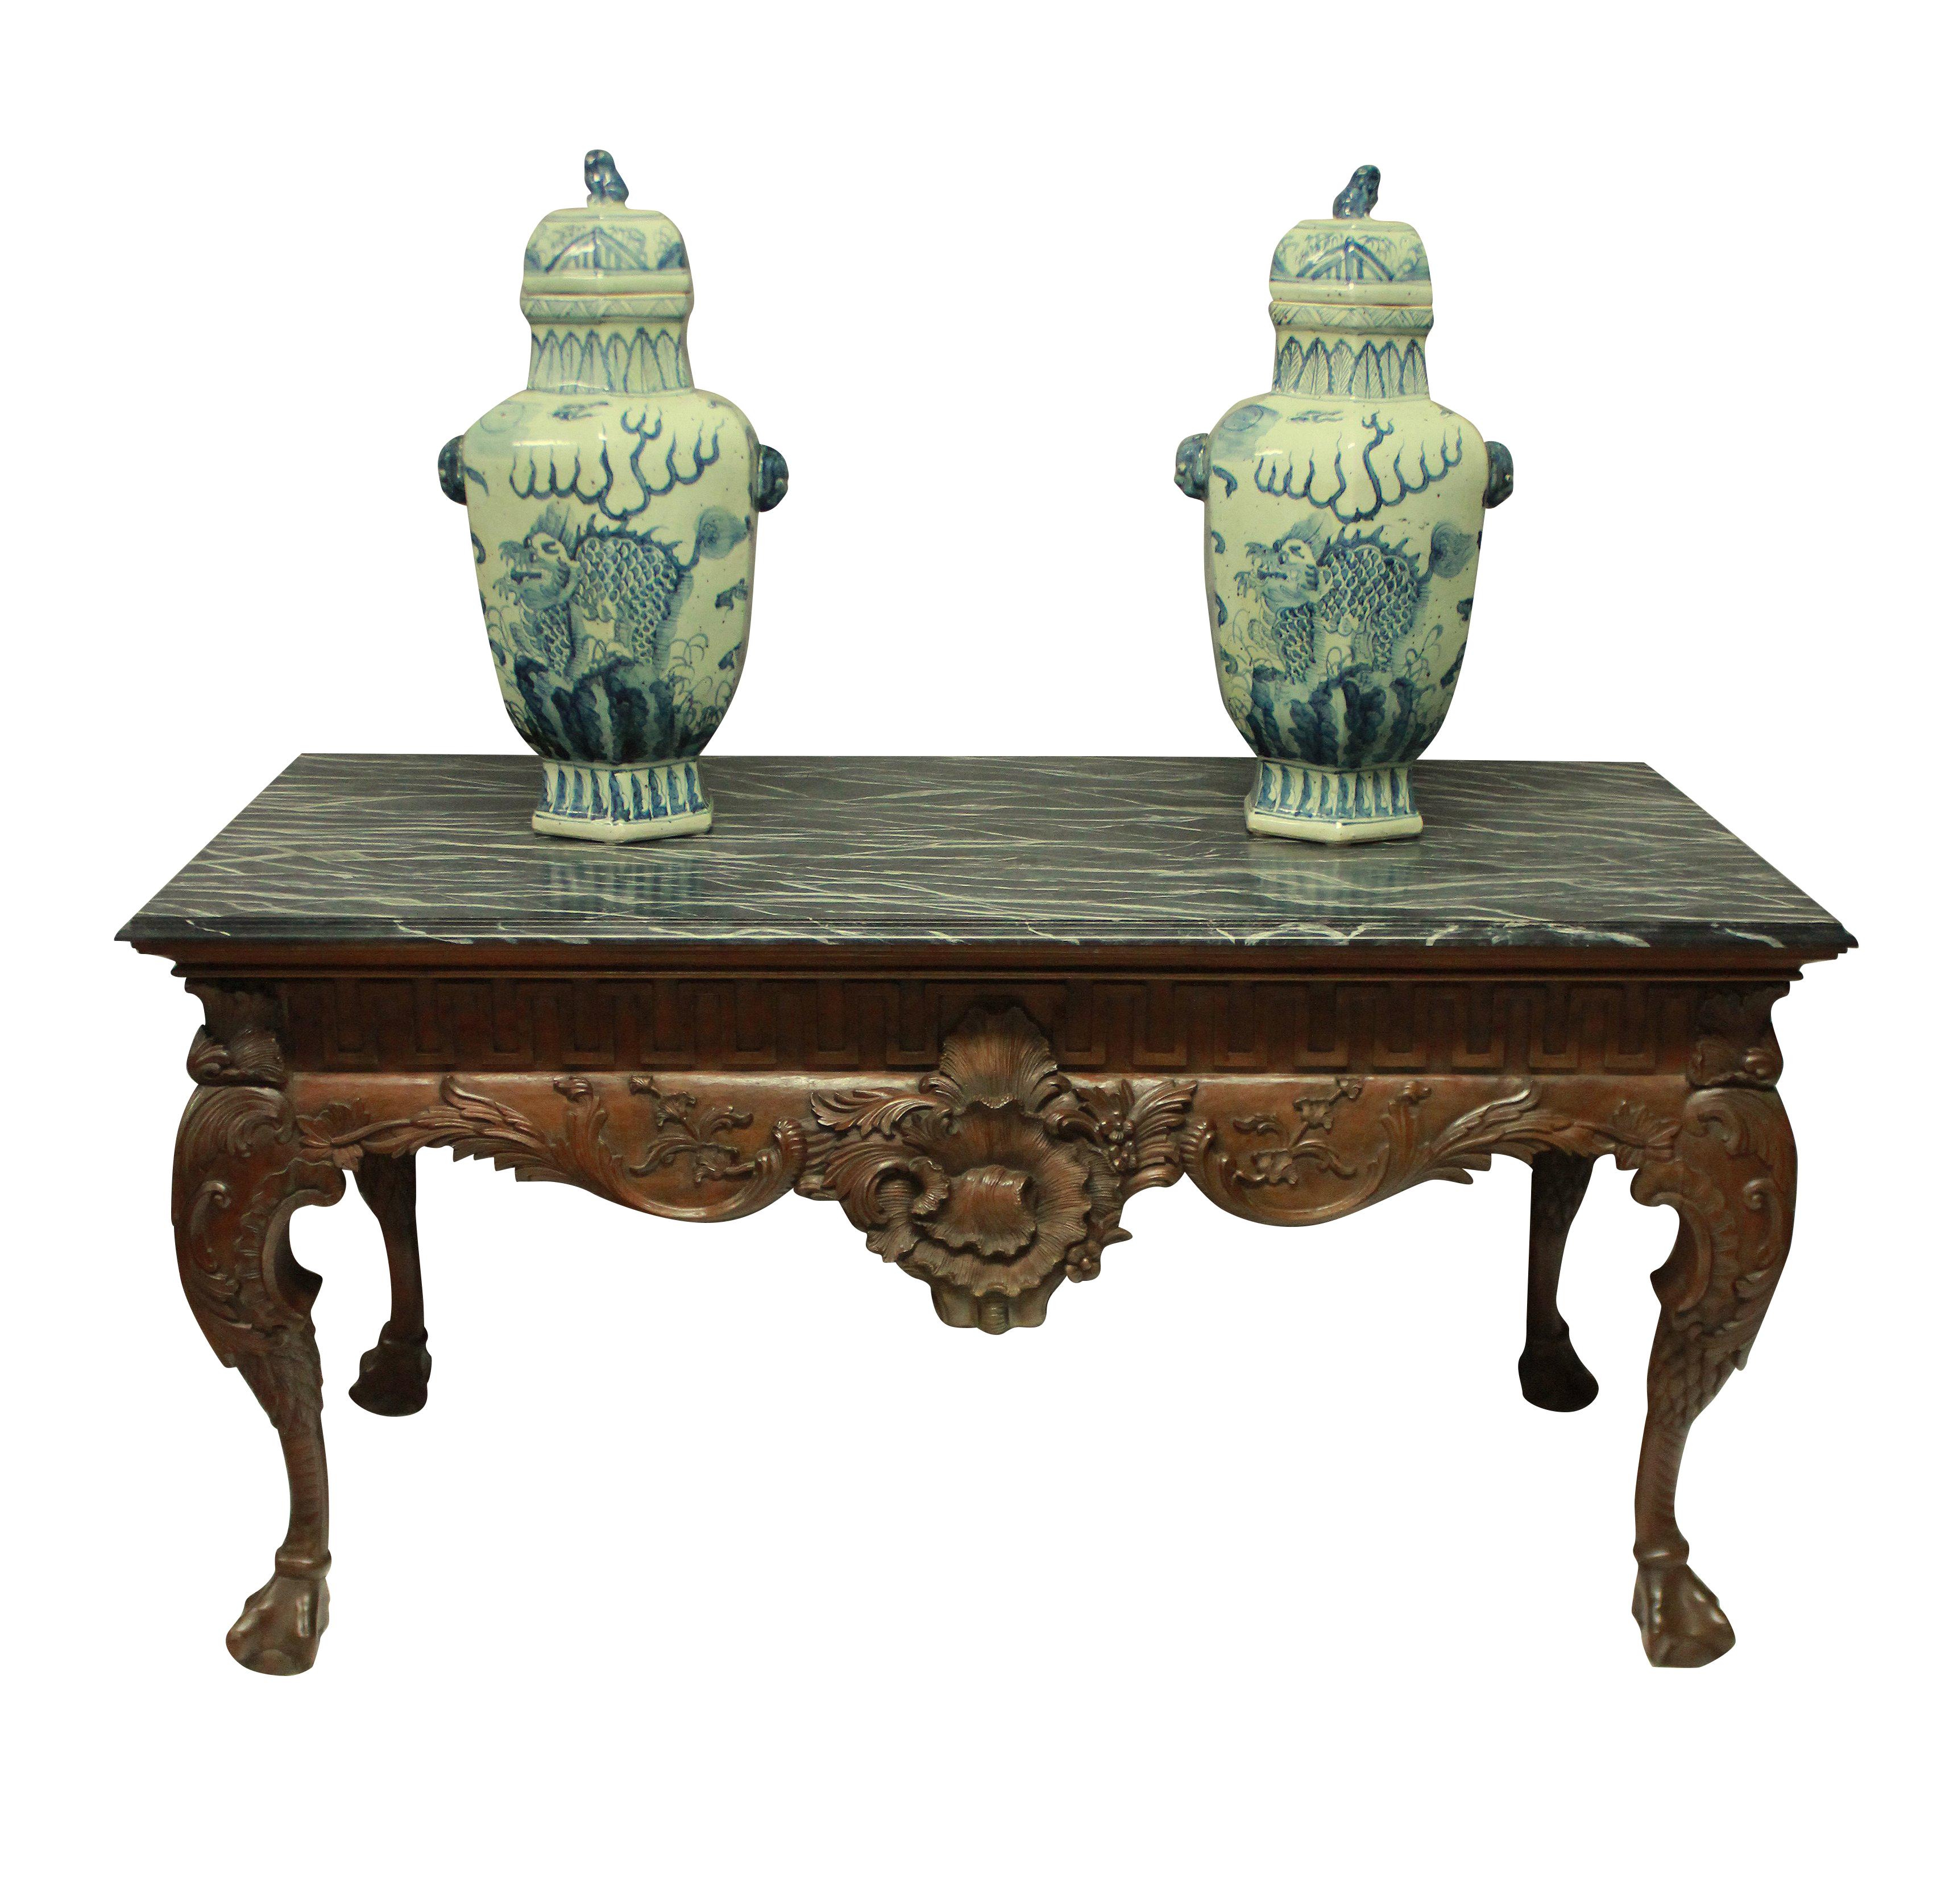 A large and beautifully carved George II style mahogany centre table, with Greek key frieze and a faux marble top. It is carved on all four sides, so could be used as a console or centre table.

 